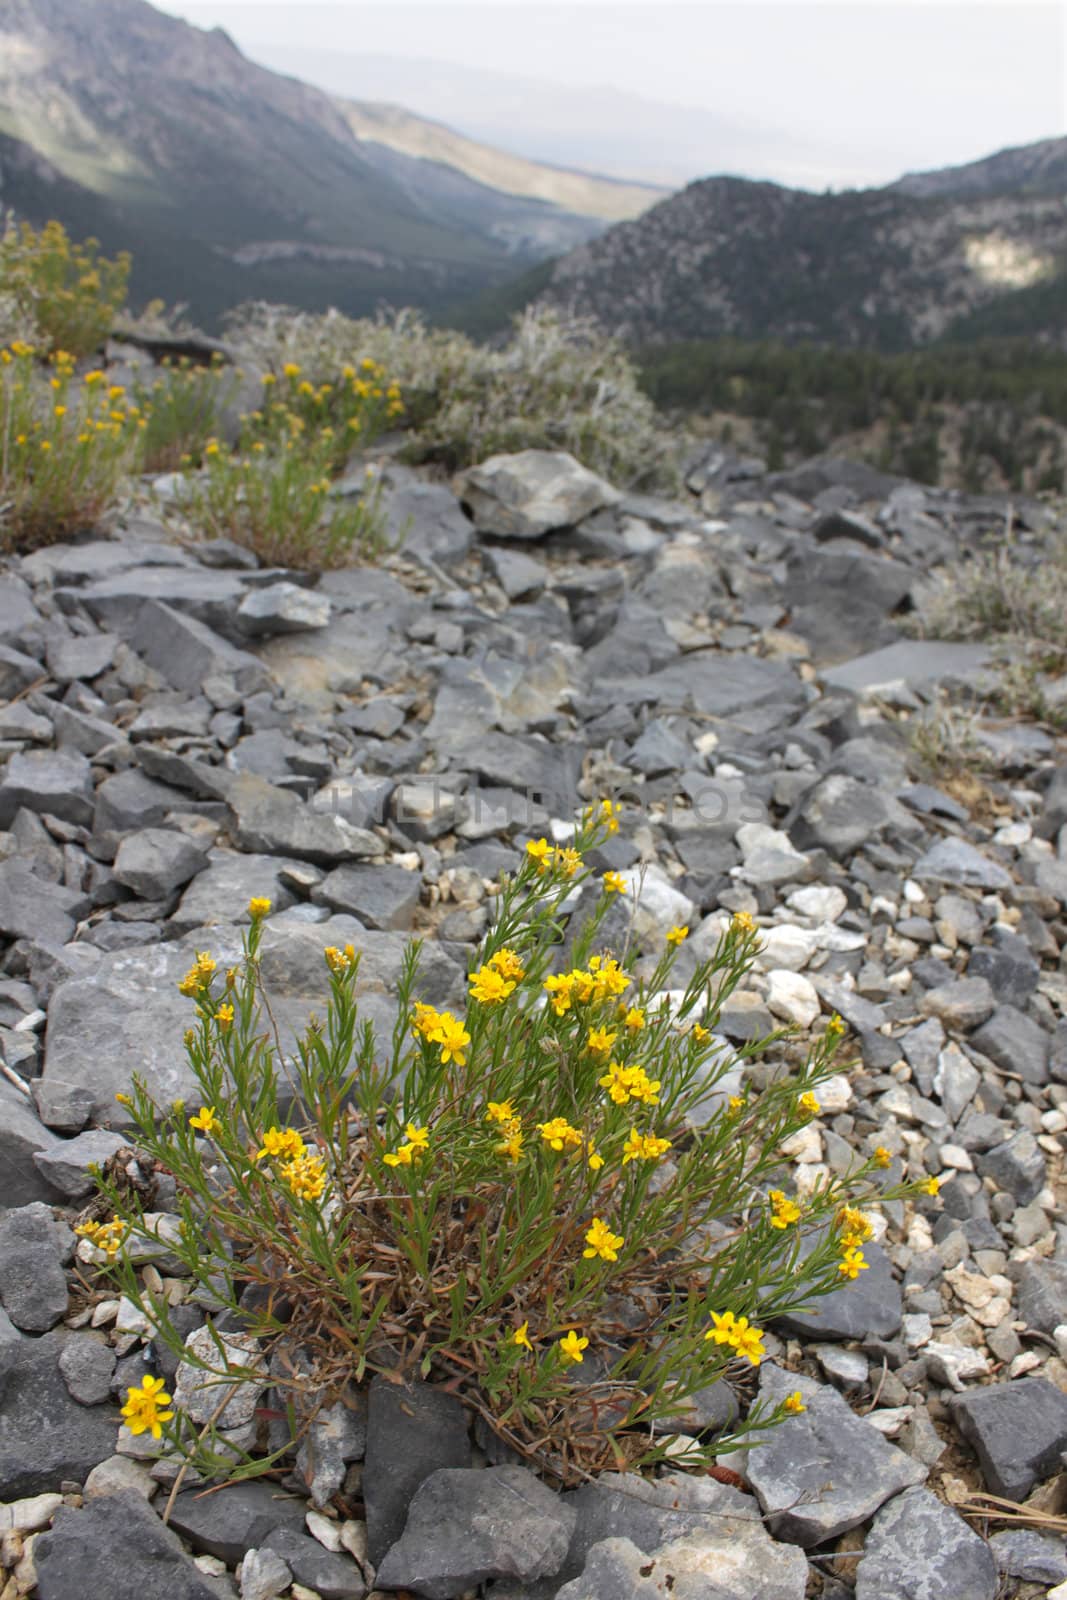 Lone stand of flowers amidst the rocky landscape of Nevada from Mount Charleston.